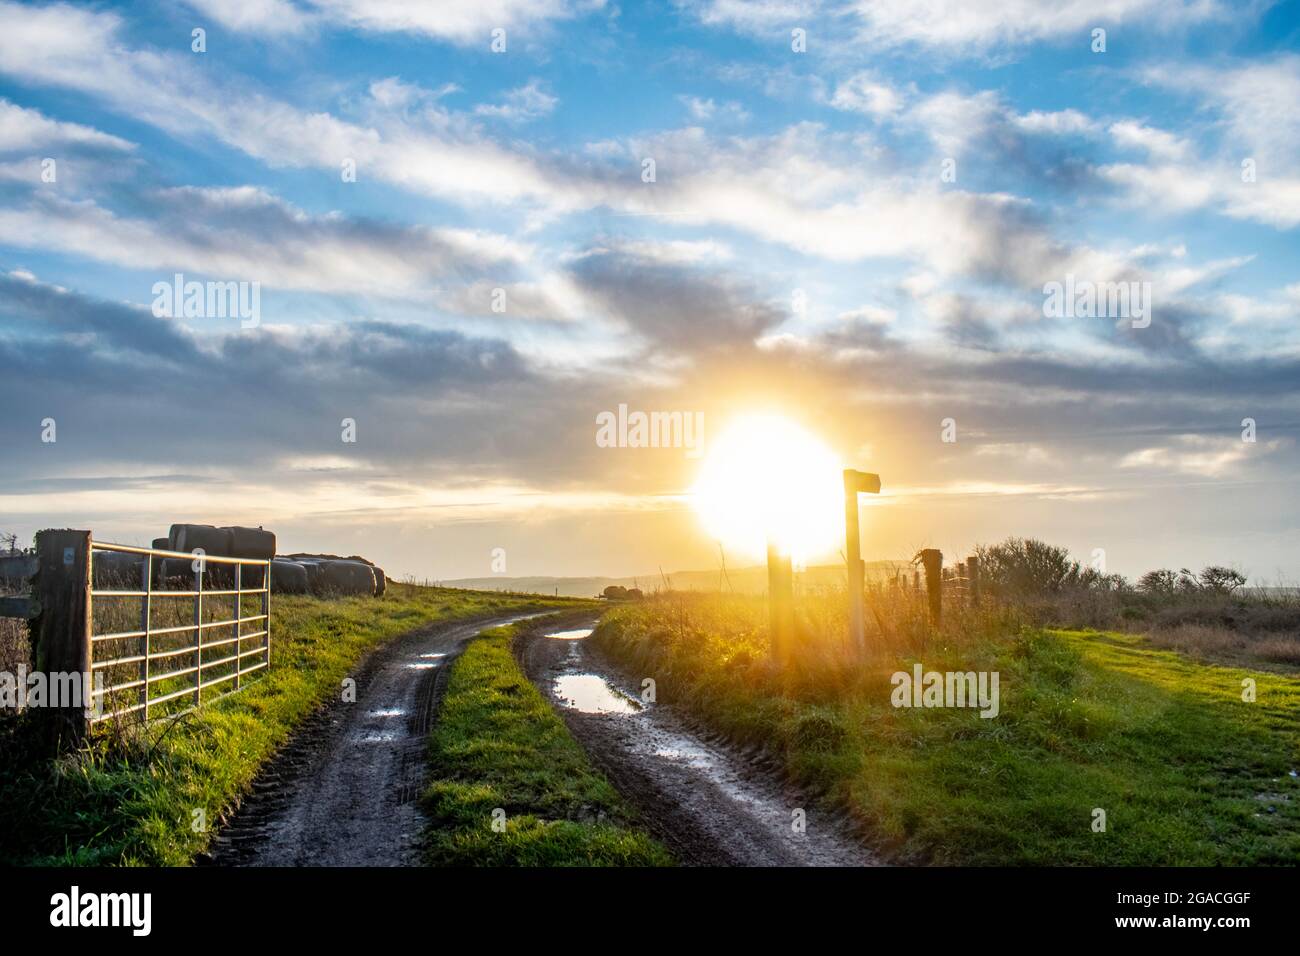 Farmers tractor gate and muddy track with bales of hay and low orange sun just after dawn on top of a hill in Kimmeridge, Dorset Stock Photo